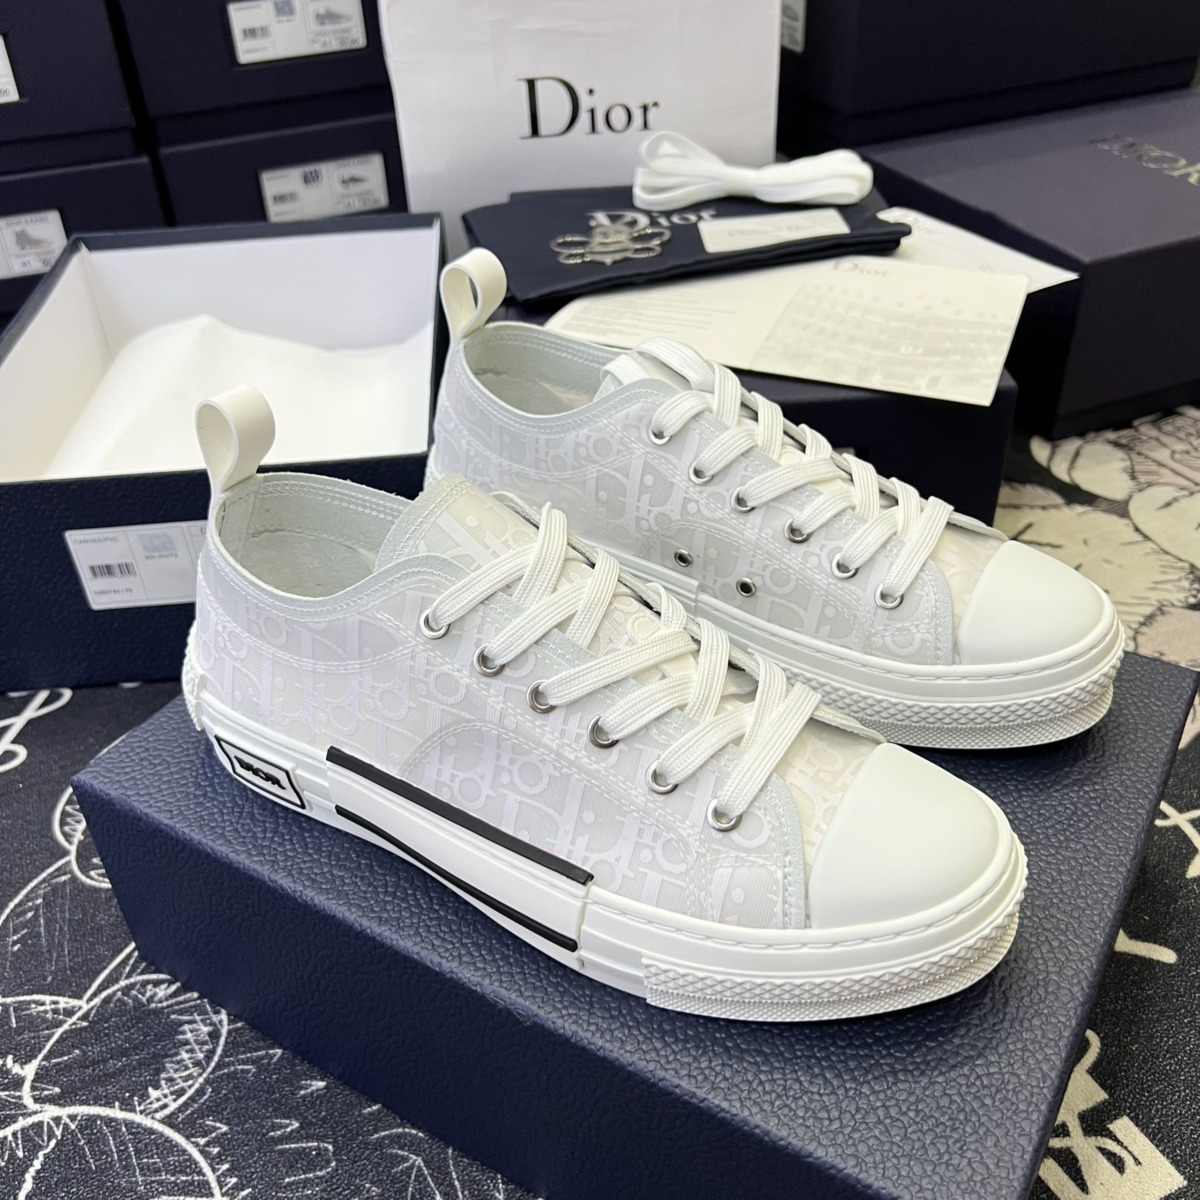 Luxury sneakers for men  Dior B23 sneakers with yellow oblique pattern